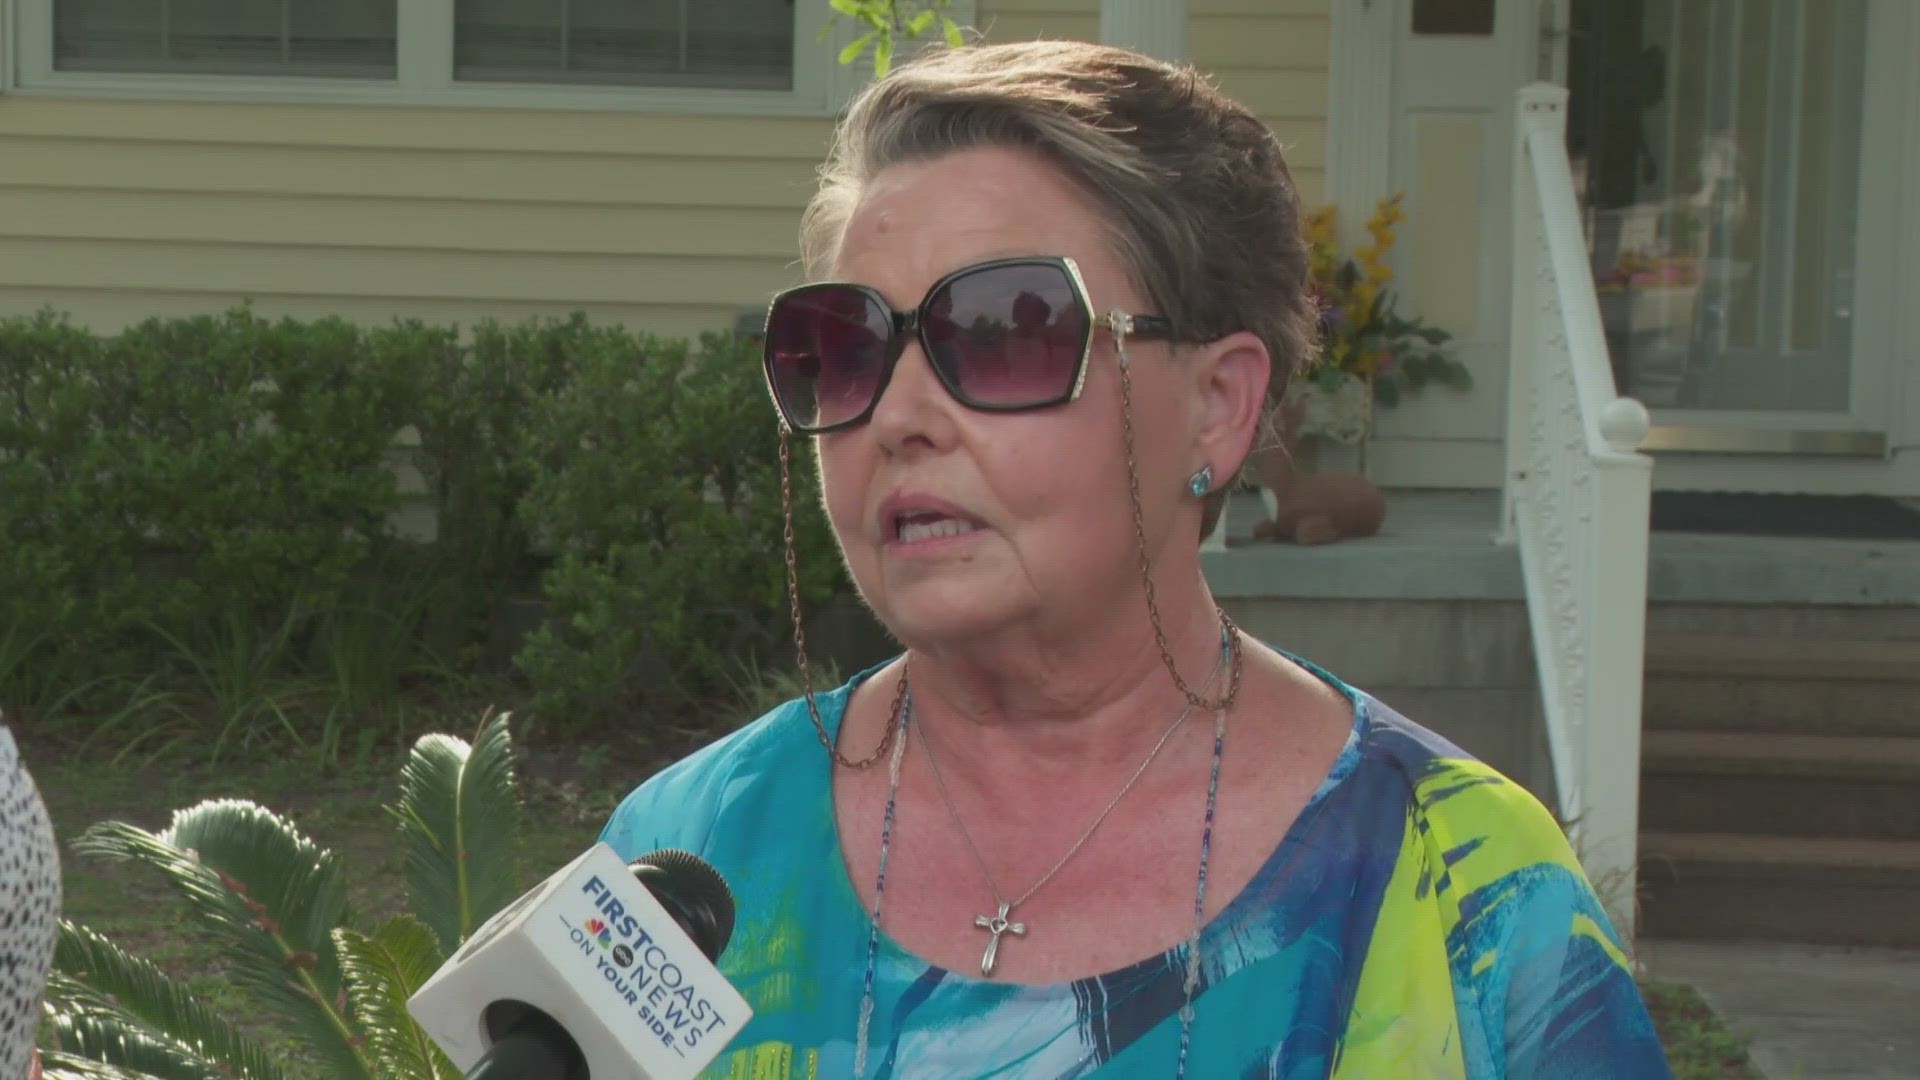 Sheryl Anglin was shocked when she came home and found out someone had been shot in her backyard.